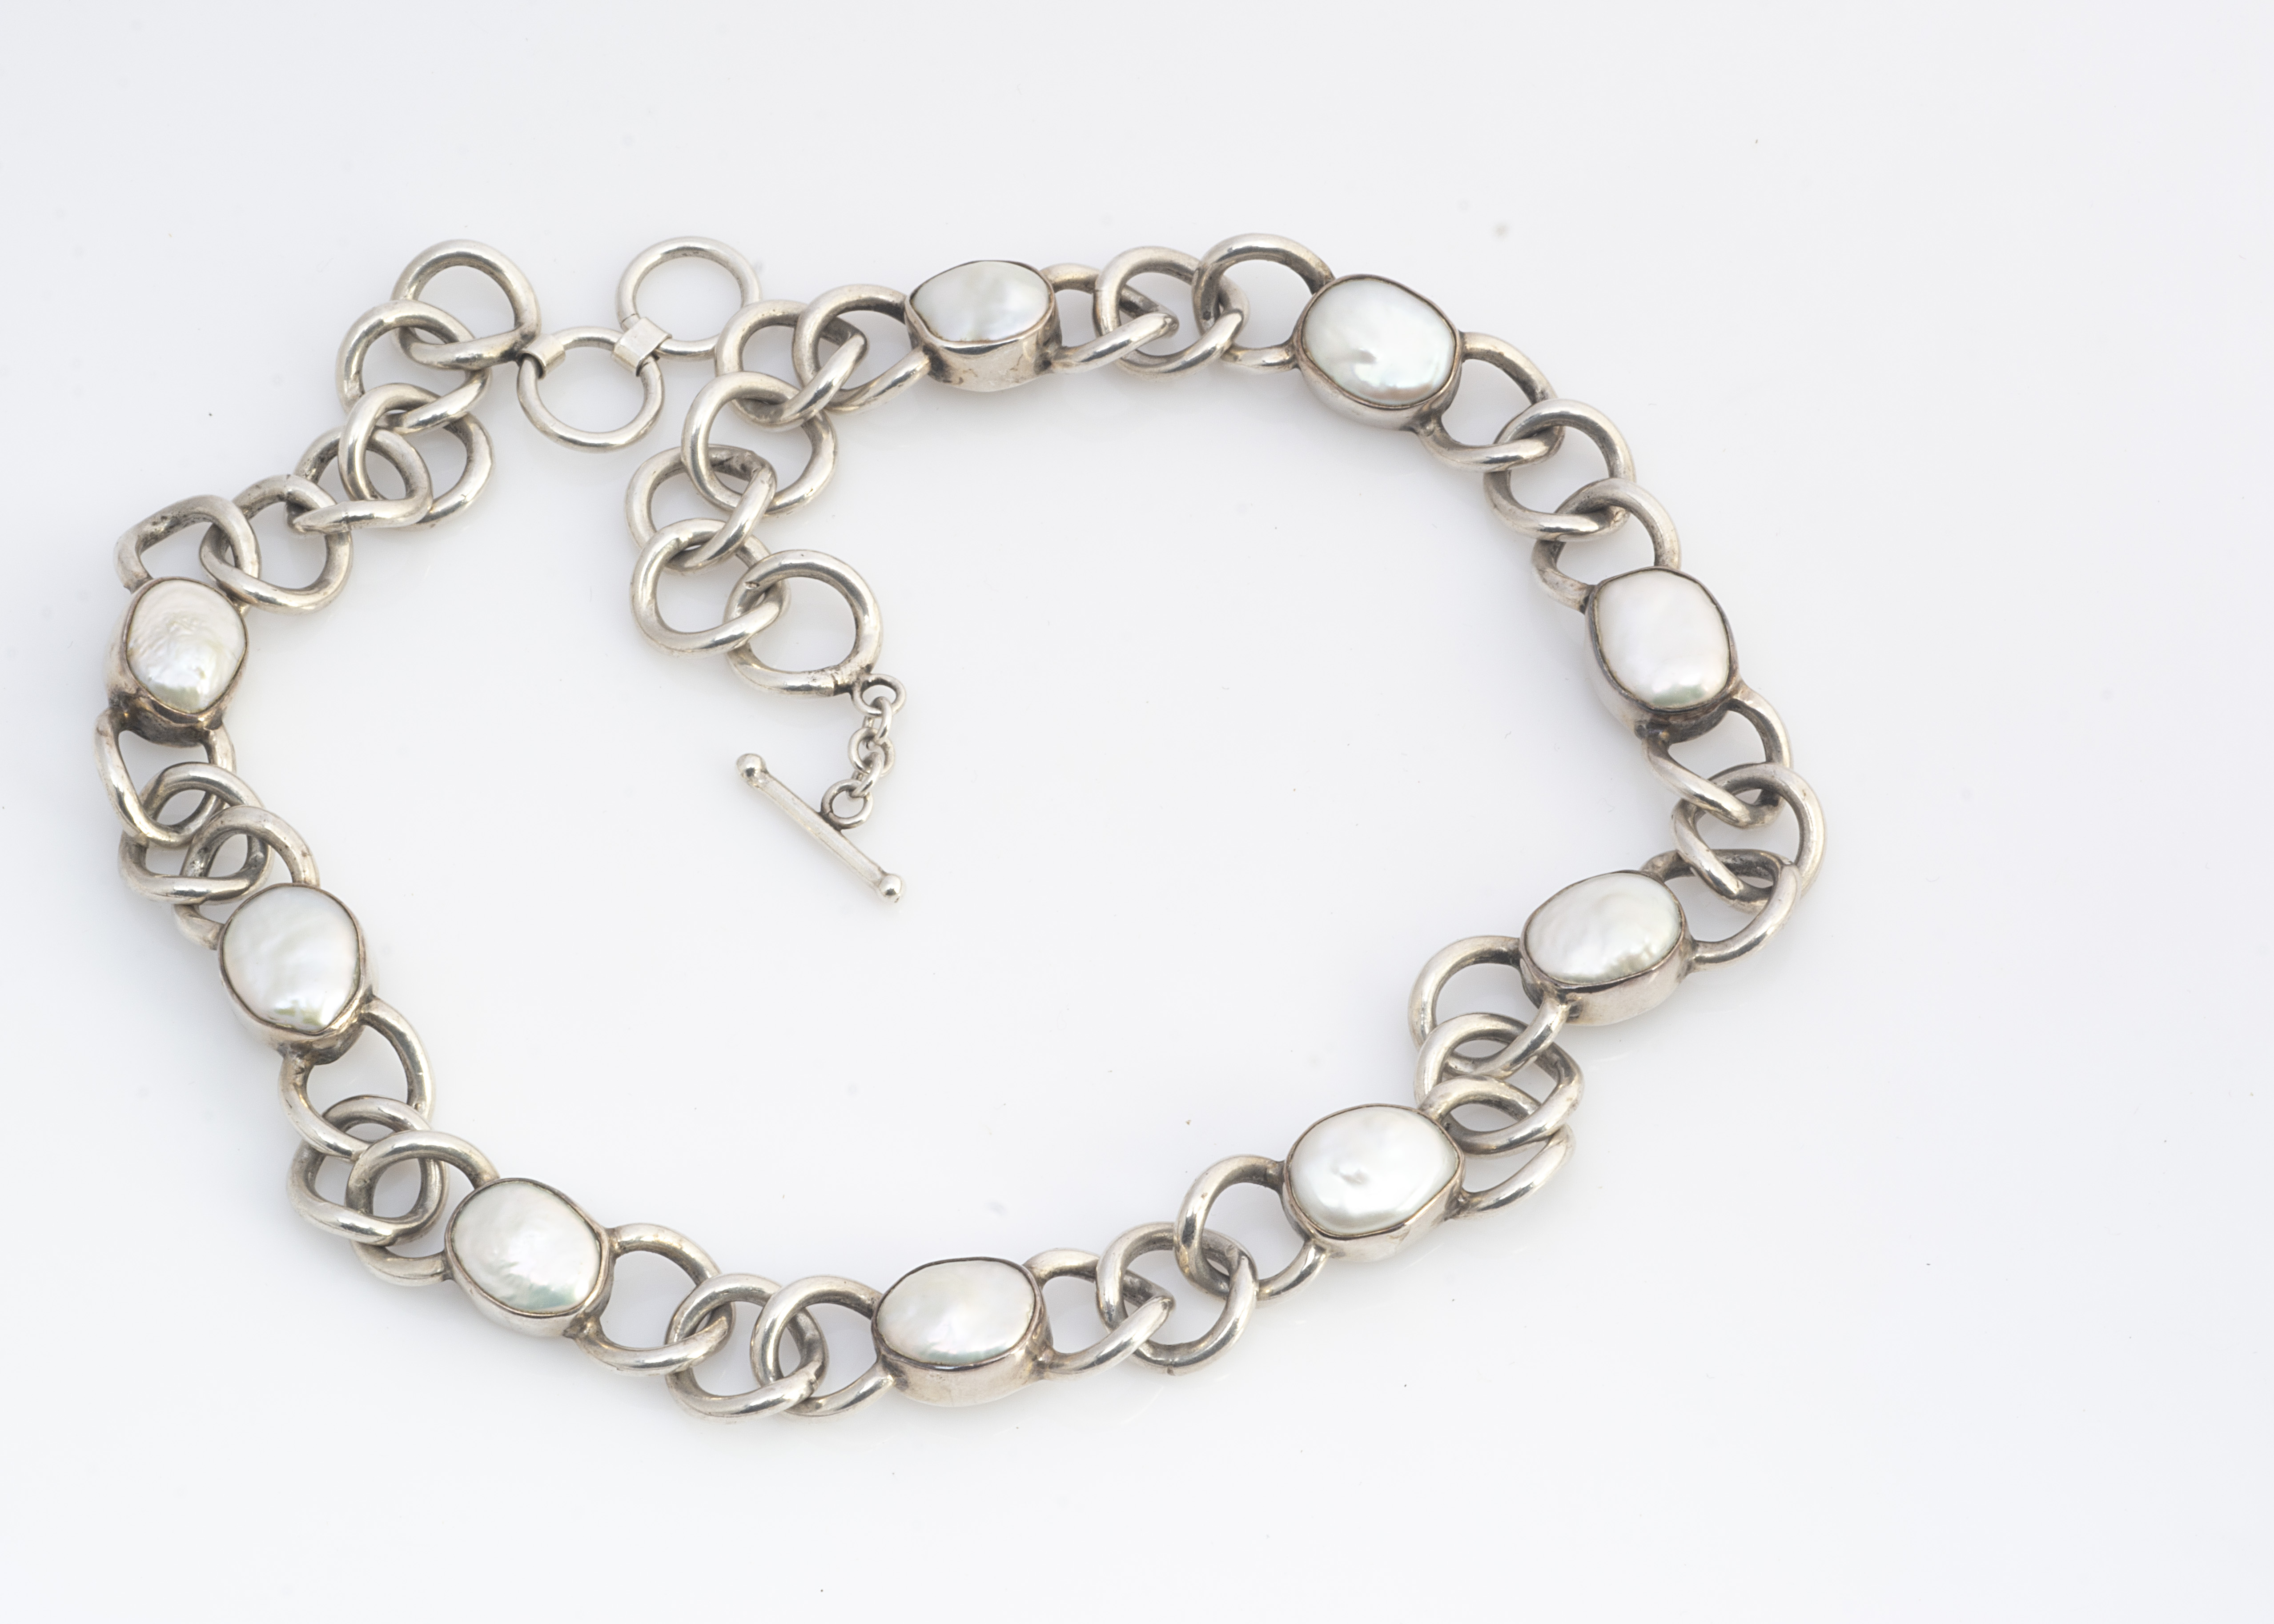 An Arts and Crafts style silver and mother of pearl necklace, the curb links alternately set with